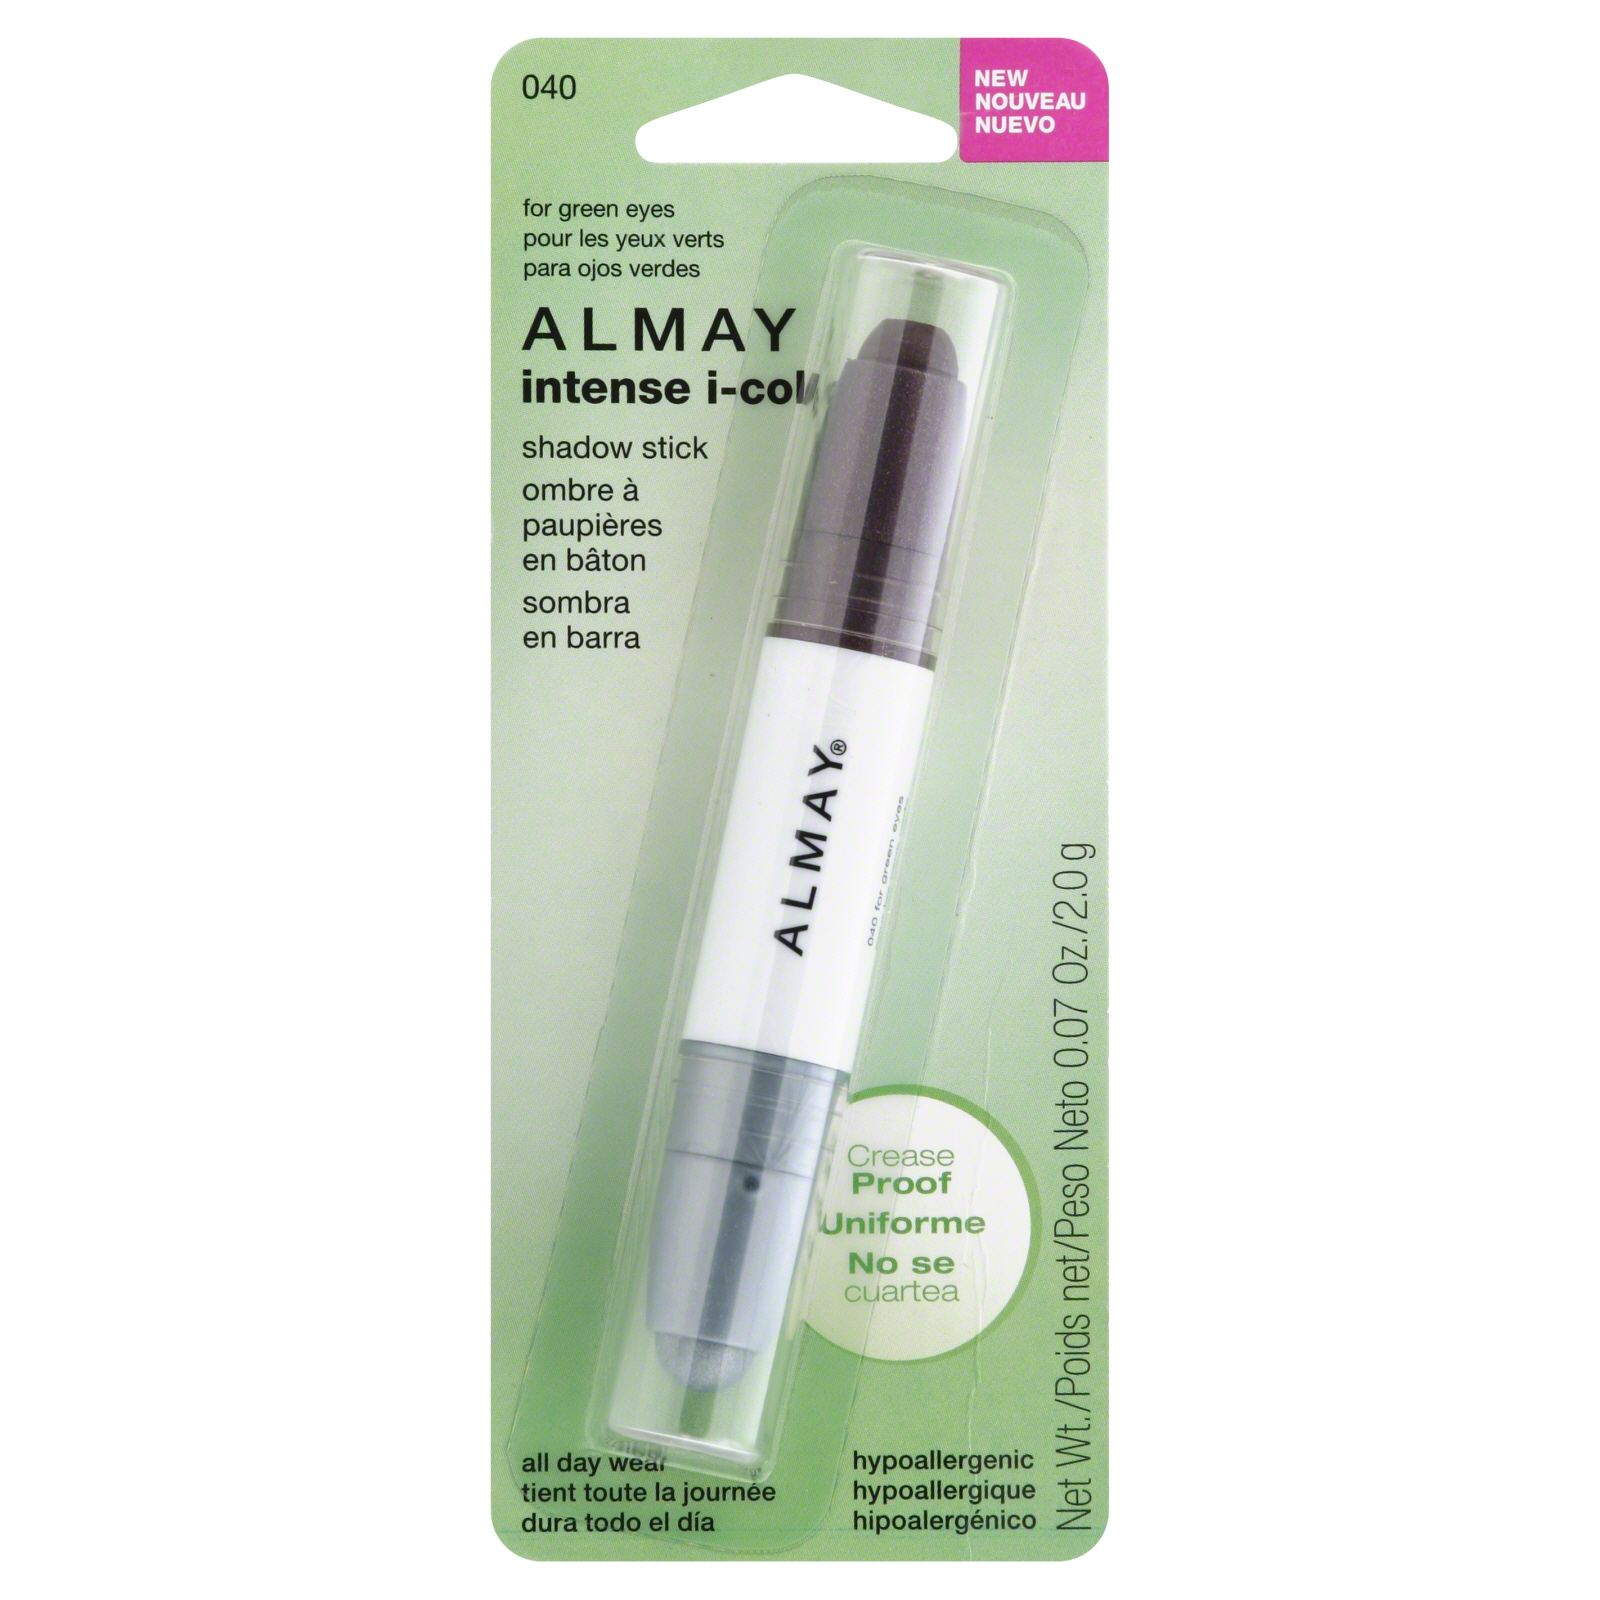 Almay intense i-color Shadow Stick, for Green Eyes 040, 0.07 oz (2 g)